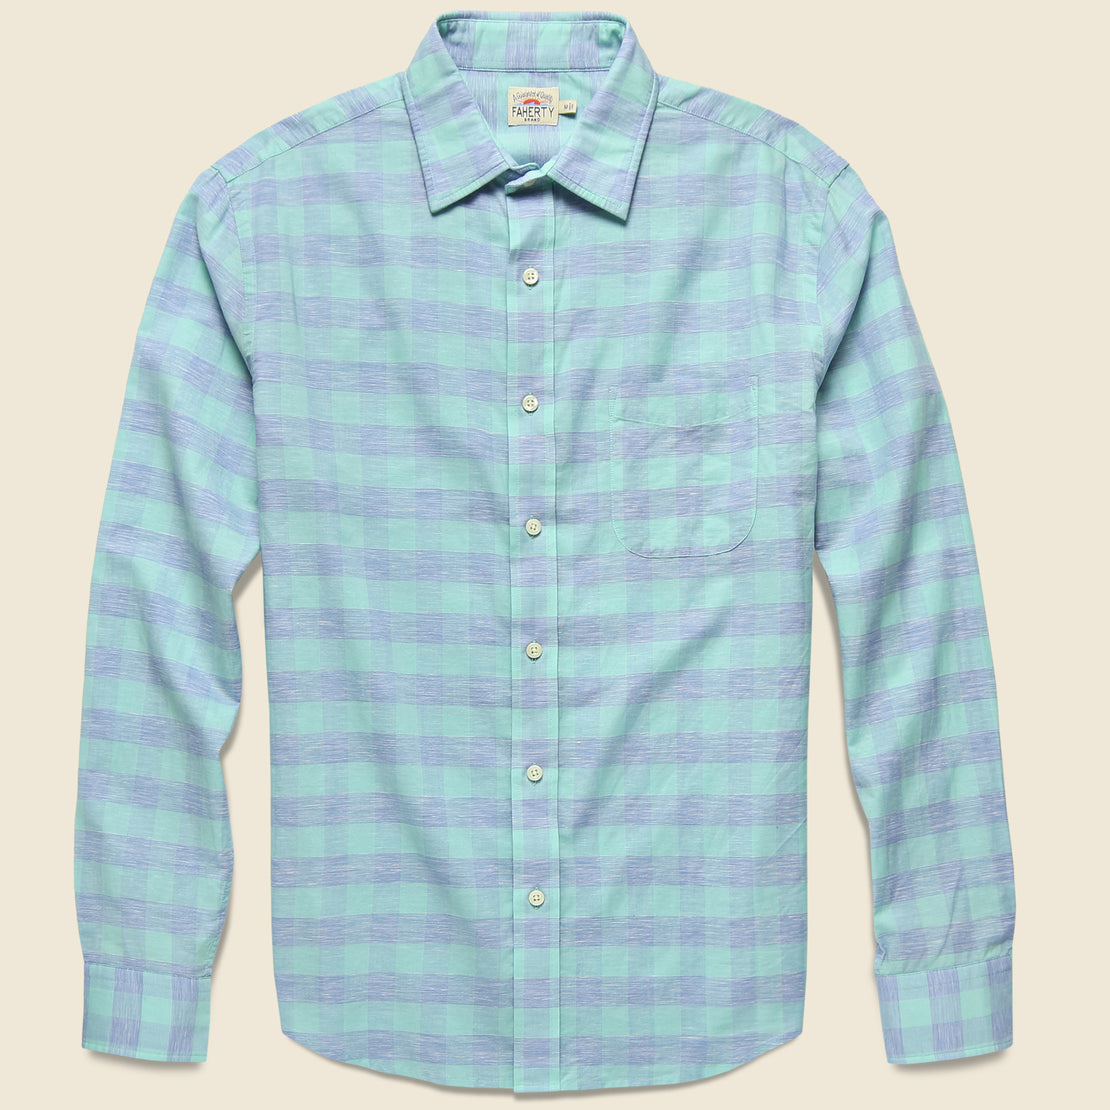 Faherty Faherty - L/S Stretch Summer Blend Shirt, SS19